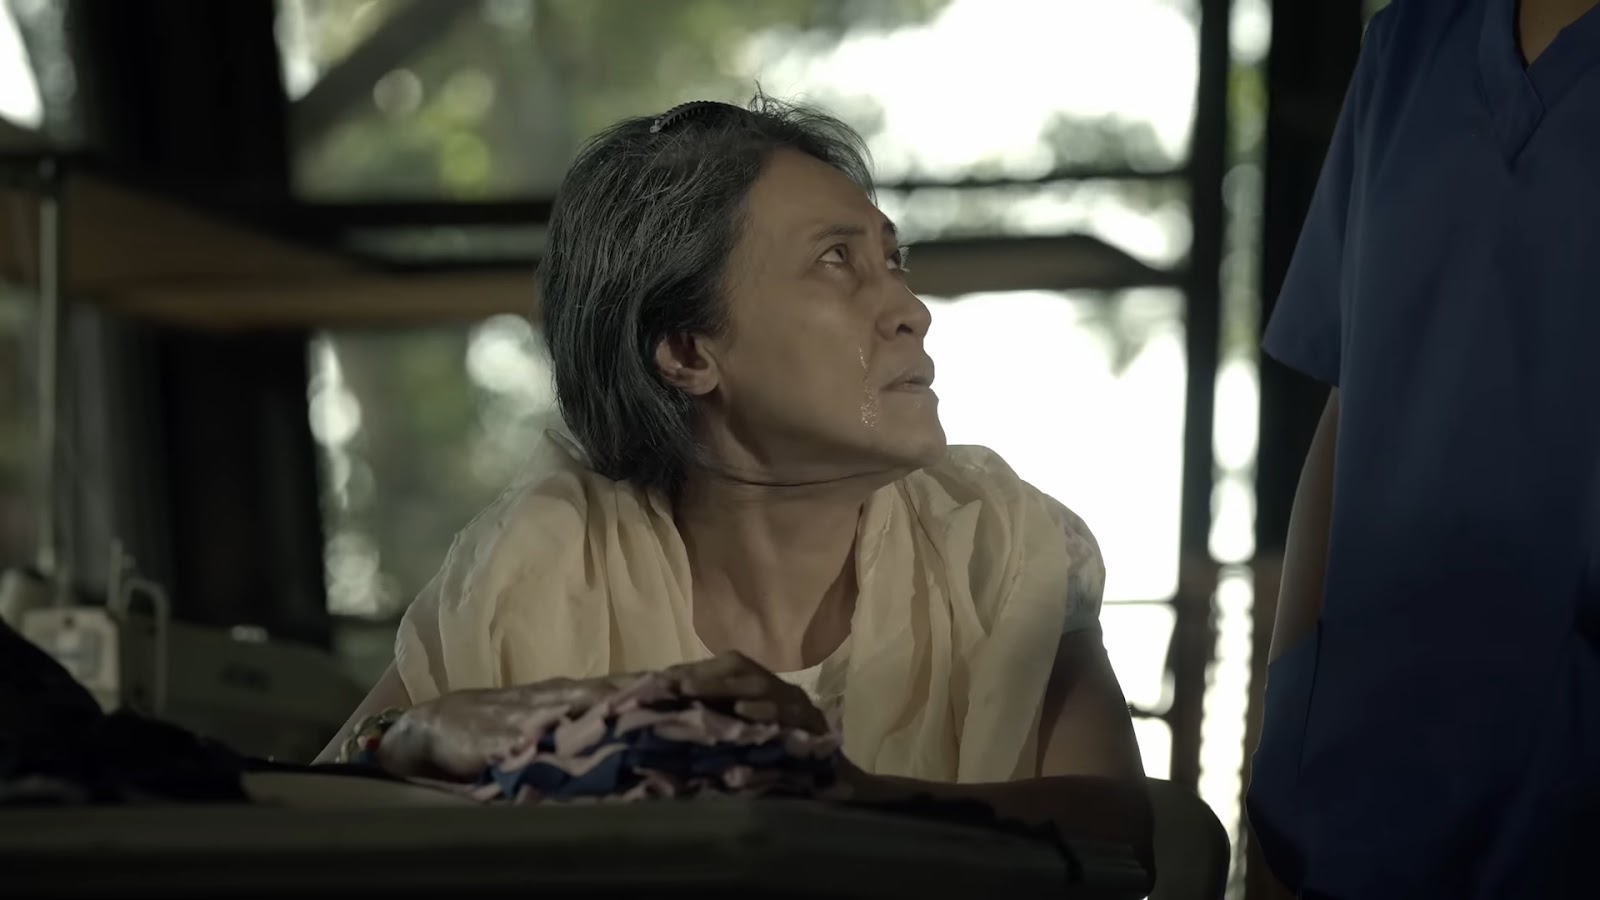 Litrato 2023 Filipino movie starring Ai-Ai delas Alas as an elderly woman who lost a photo of her daughter and grand-daughter